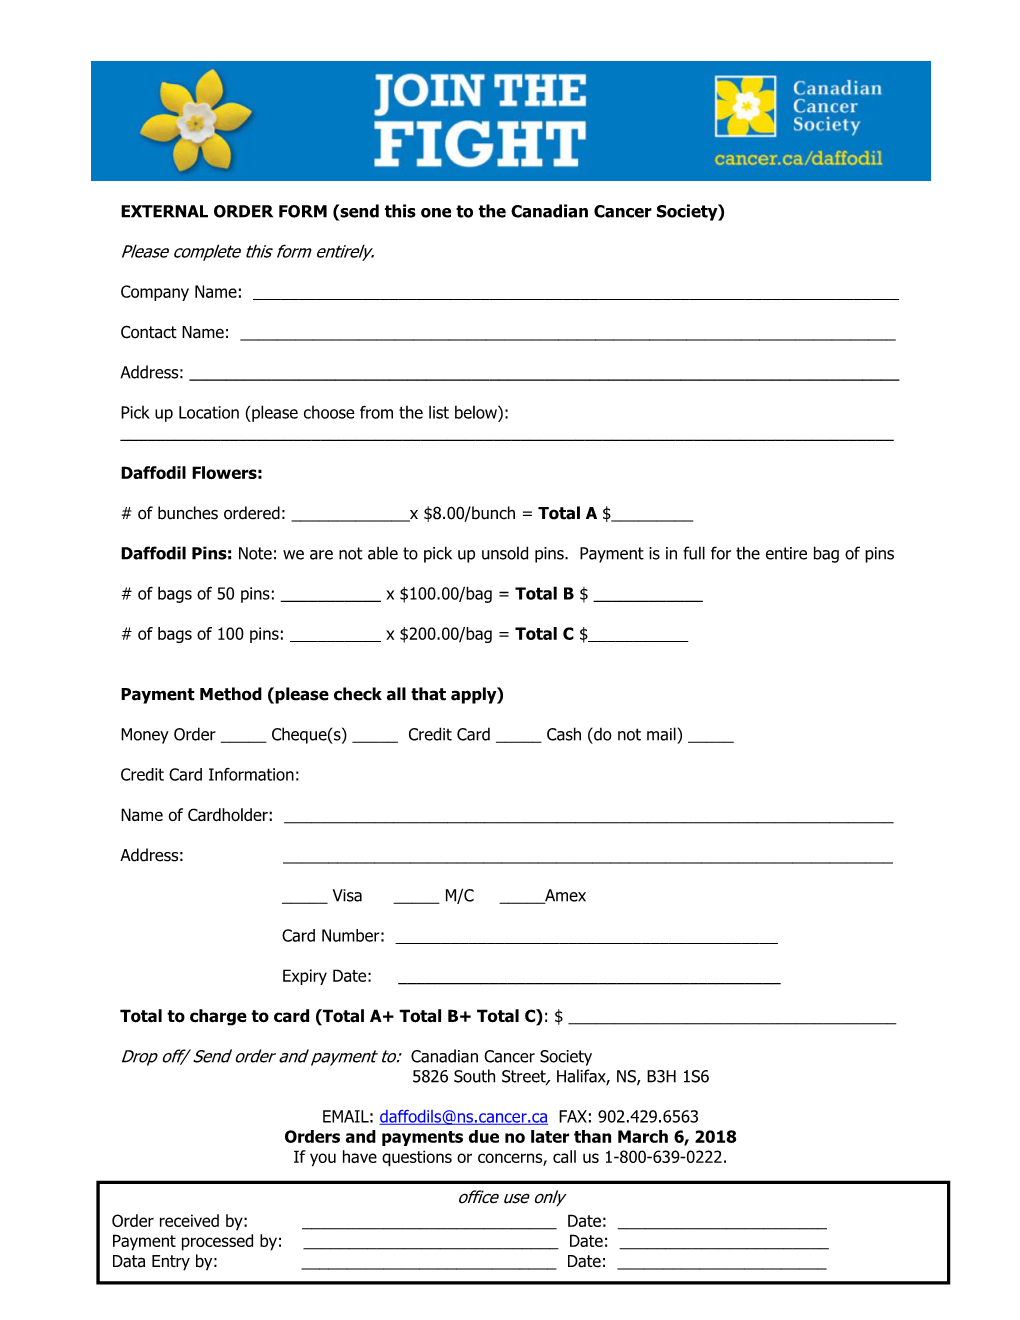 Please Complete This Form Entirely. Drop Off/ Send Order And